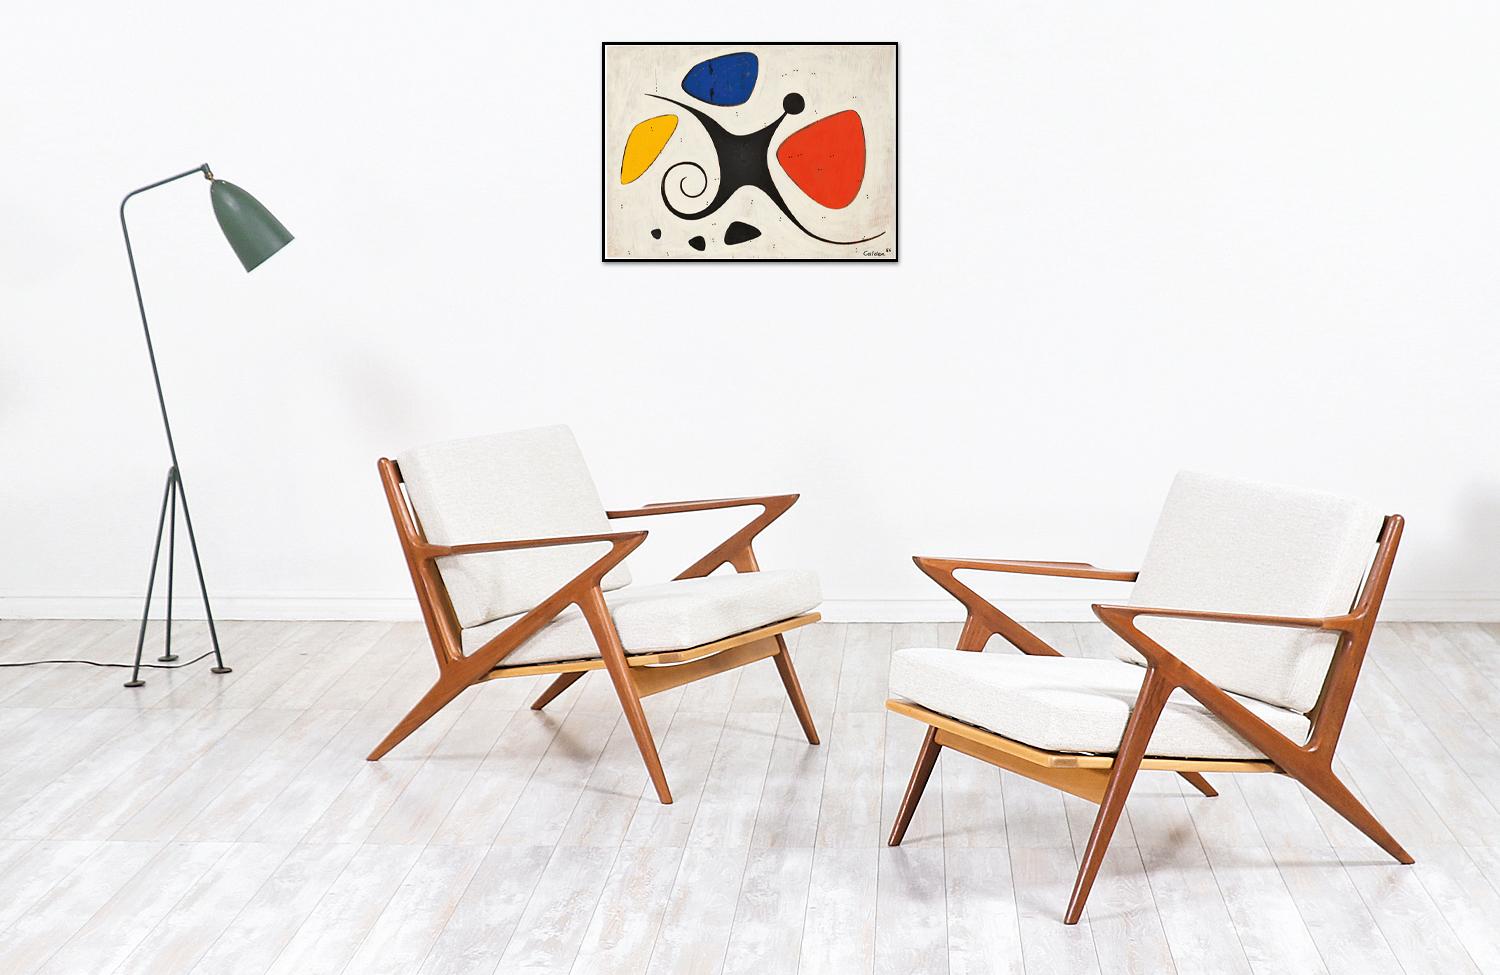 A must-have pair of iconic modern lounge chairs! Designed by the famous architect Poul Jensen and produced by the renowned company Selig in Denmark circa 1960s. This spectacular design is known as the 